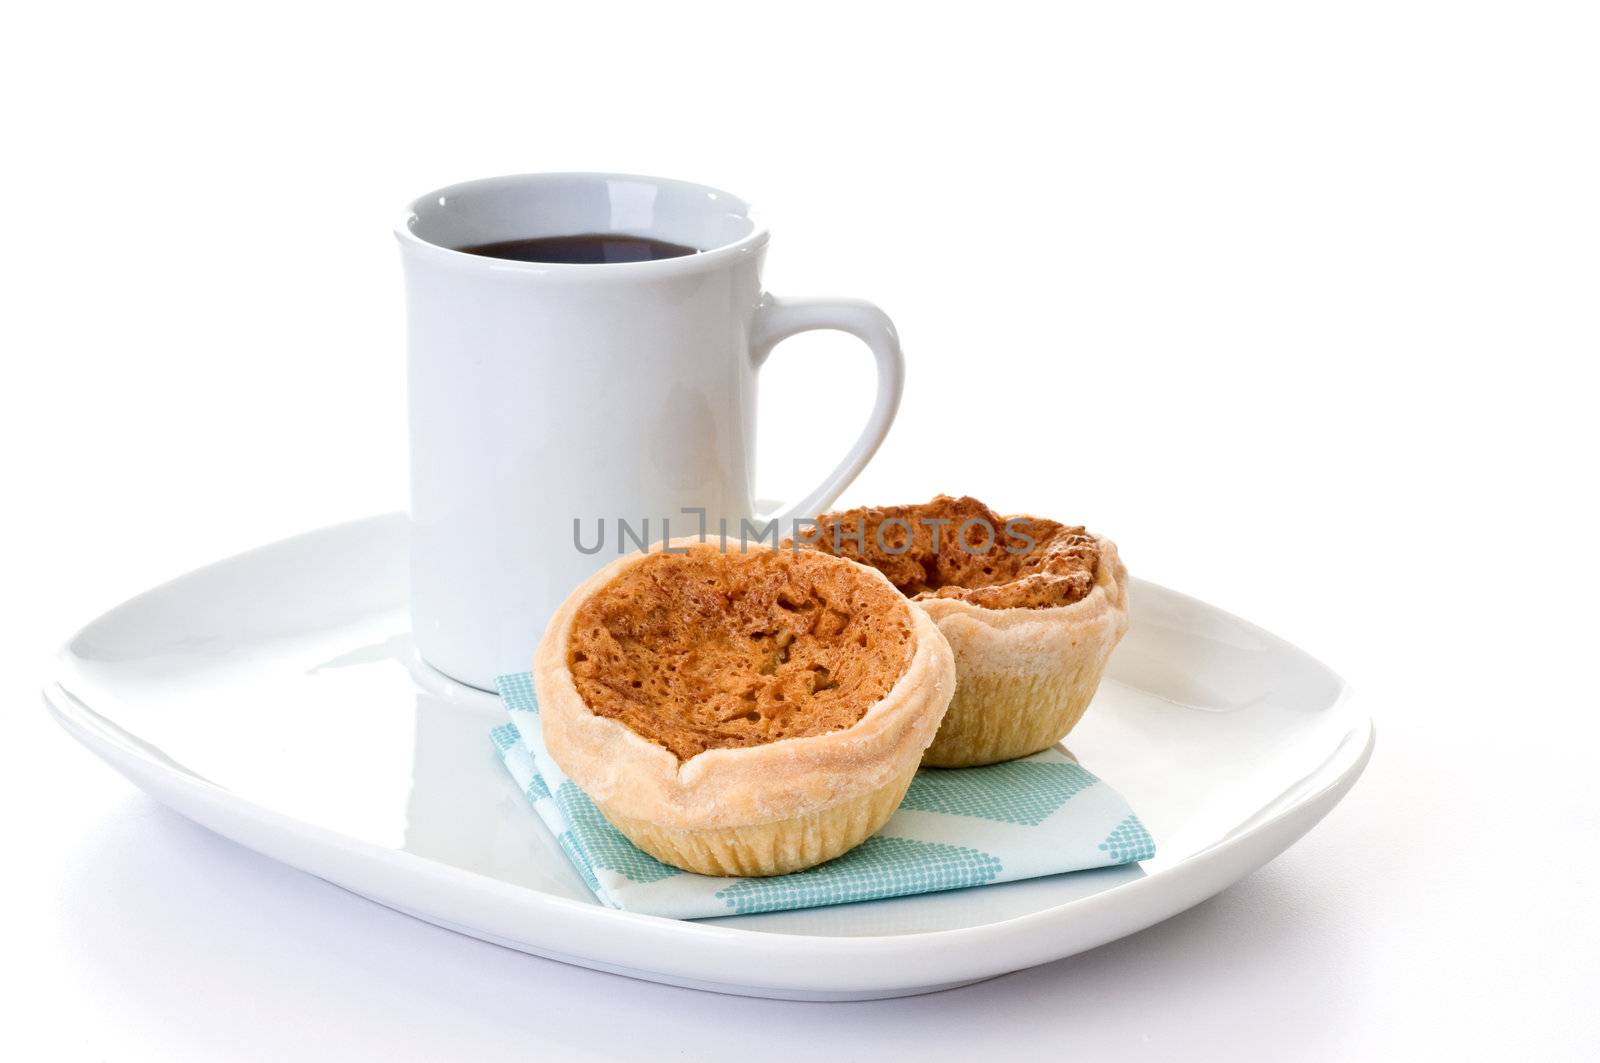 Homemade butter tarts served with fresh coffee.